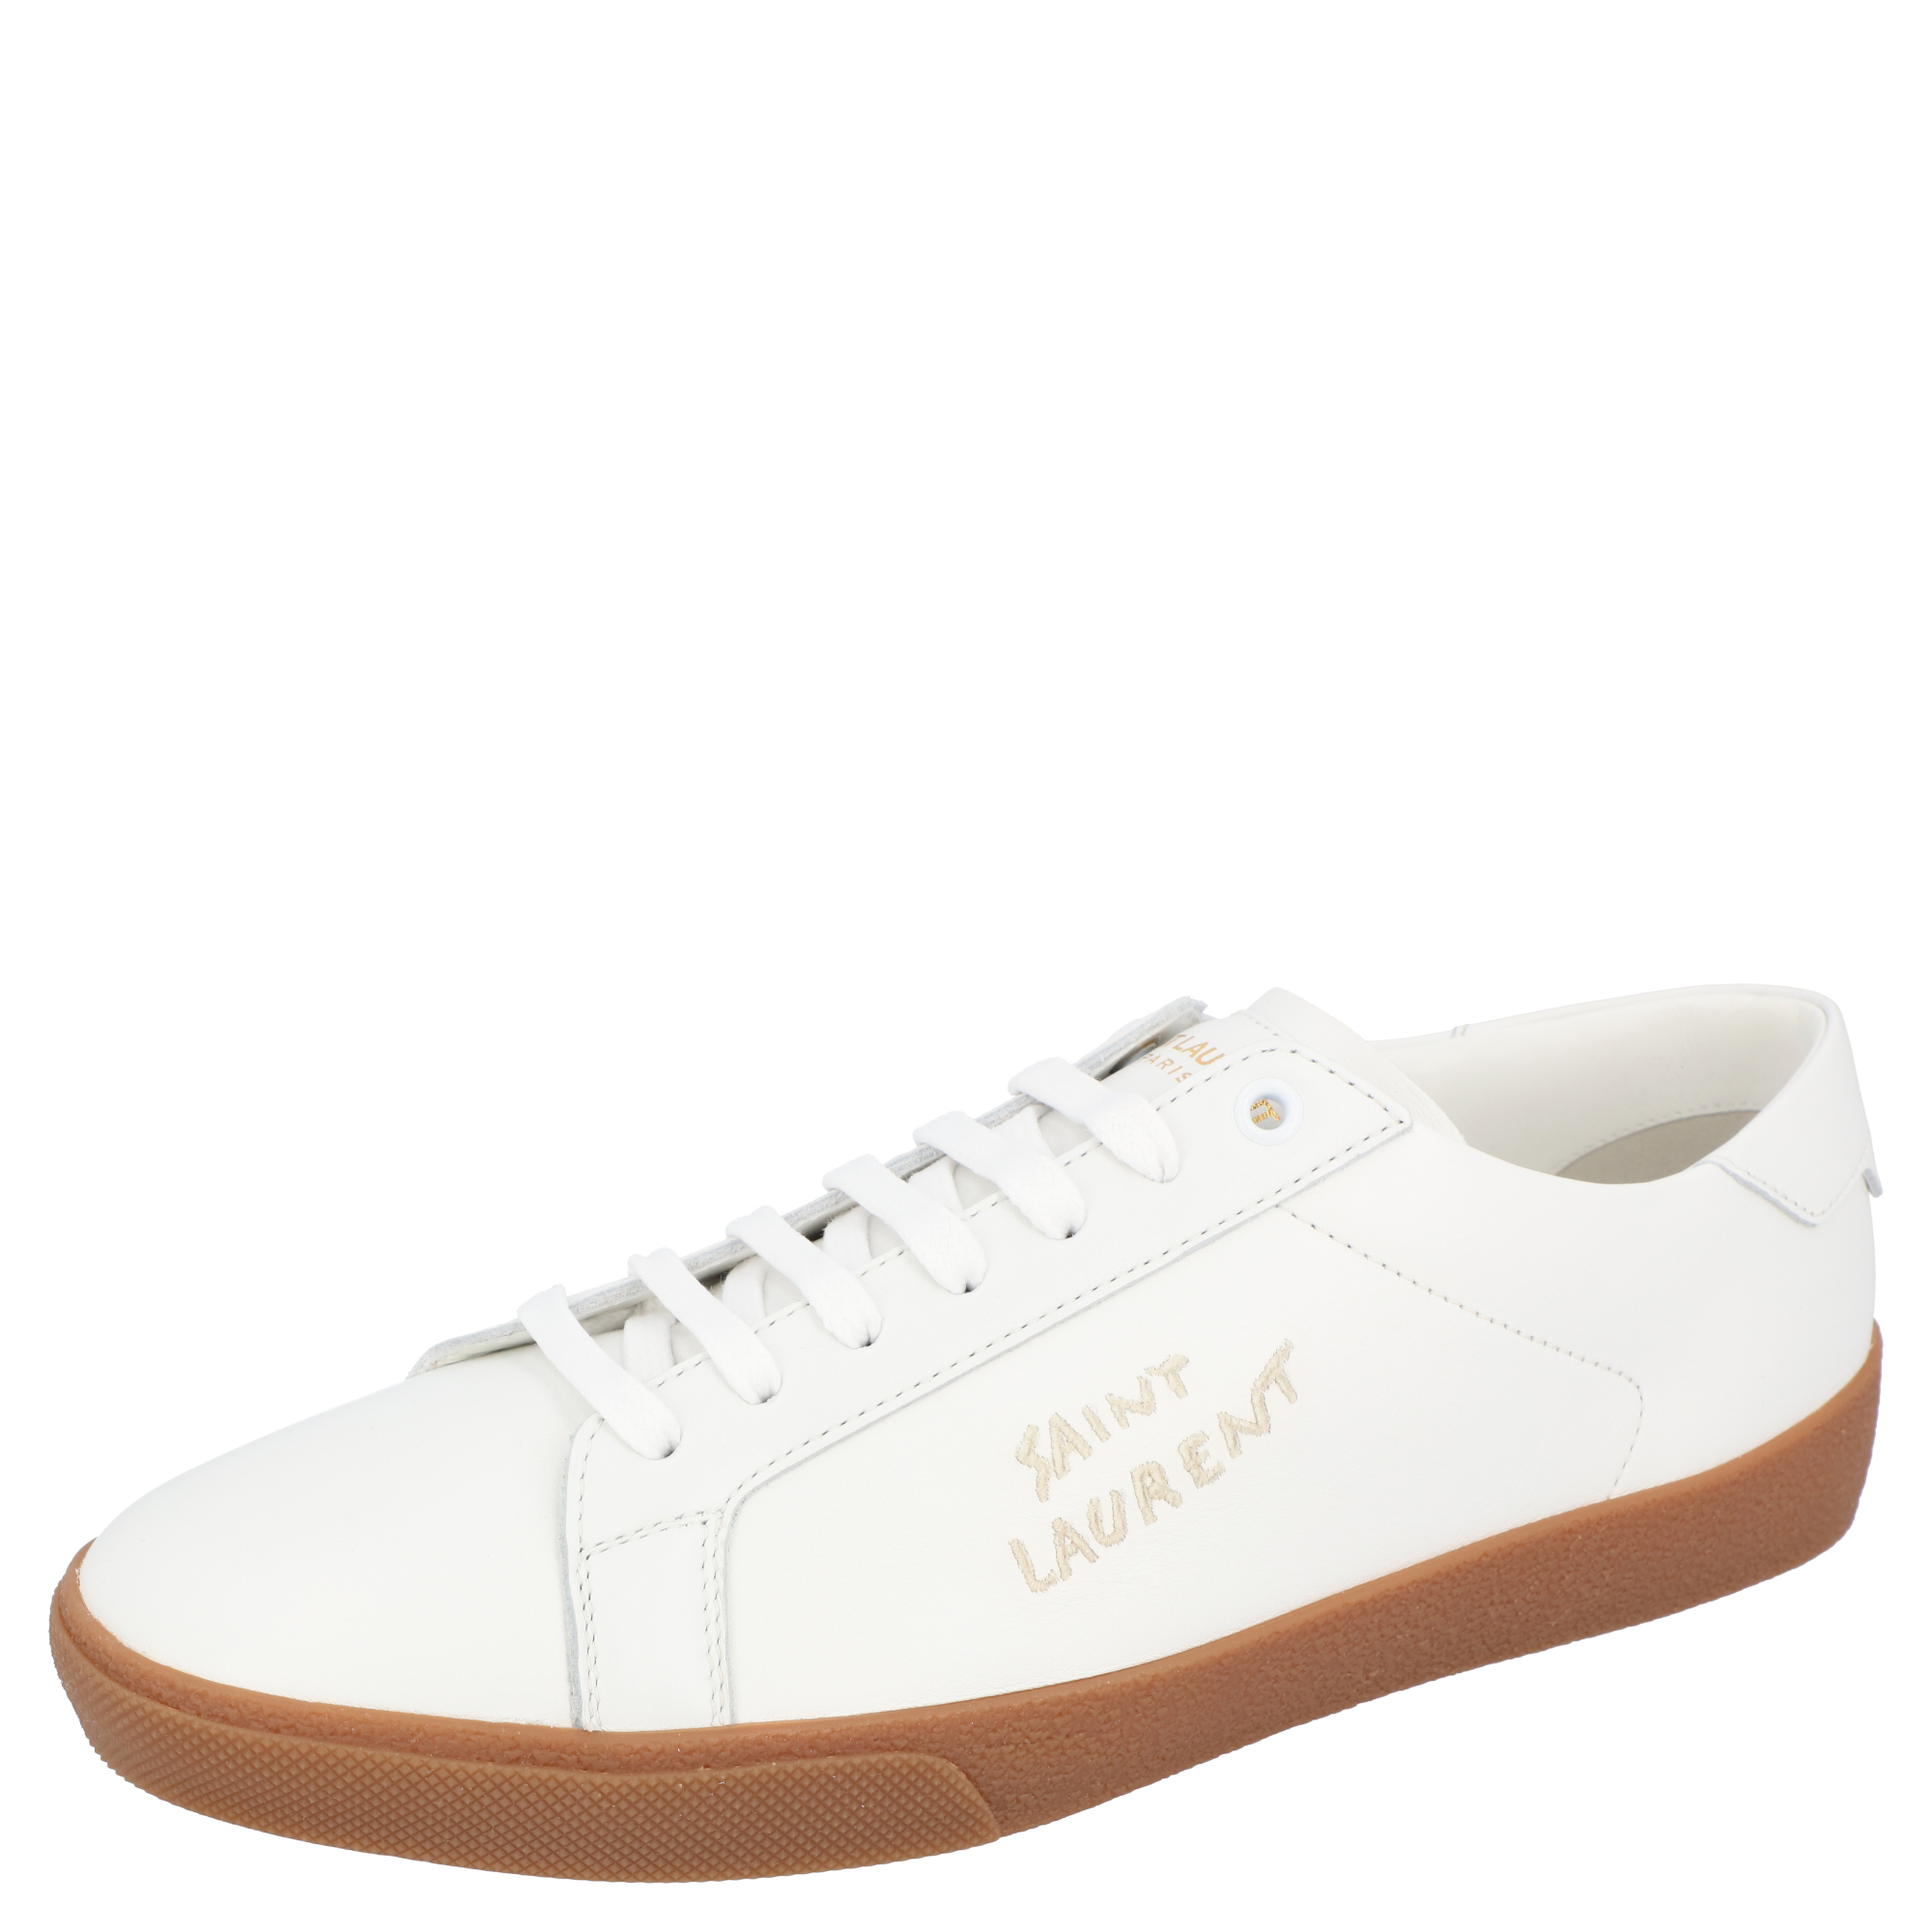 Pre-owned Saint Laurent White Leather Sl/06 Embroidered Court Classic Trainers Size Eu 42.5